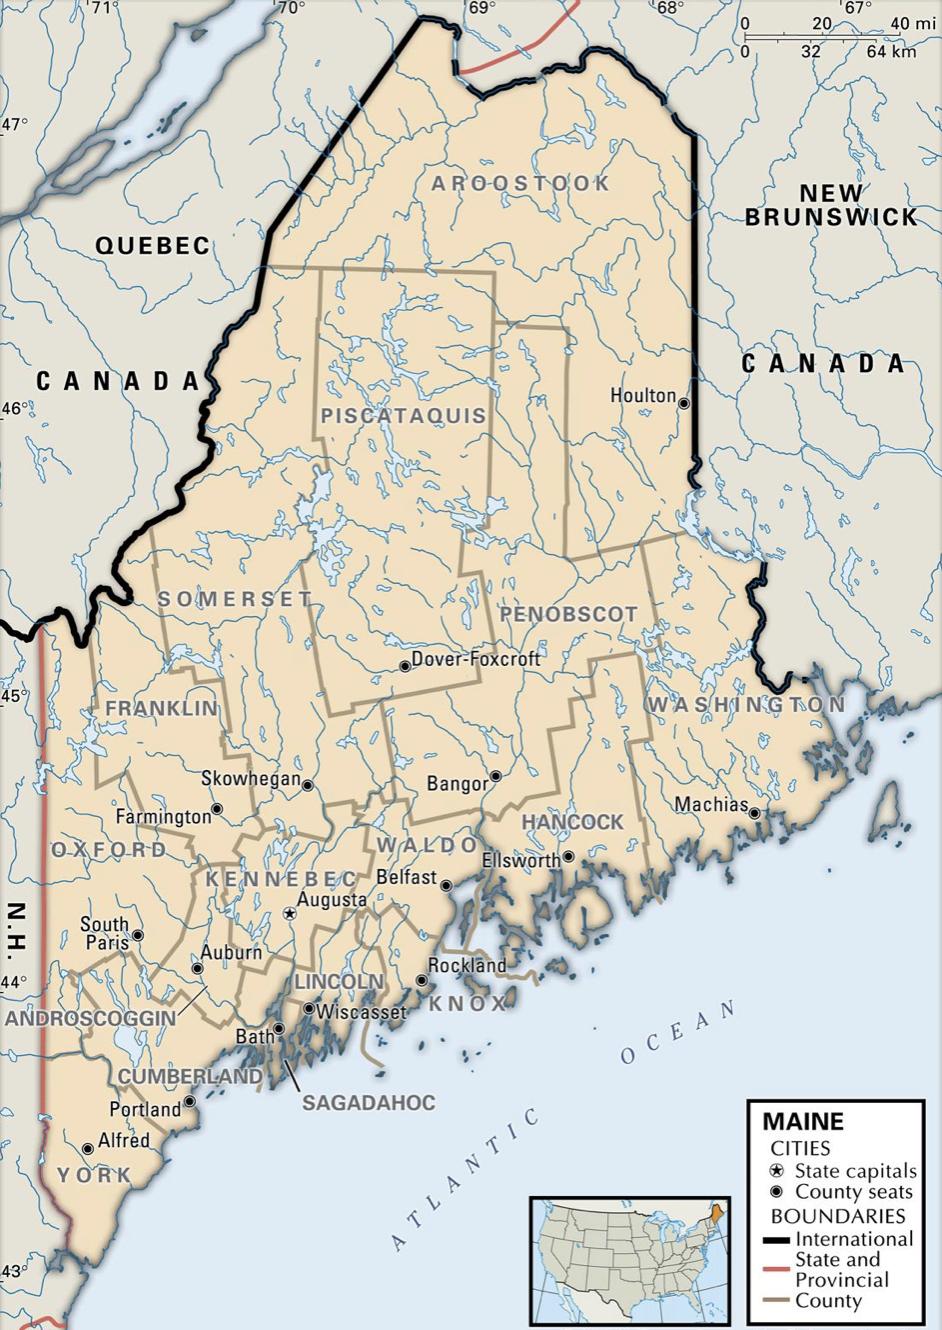 Introduction WARM UP: Some Canadians are angry that the state of Maine, prominently located between Quebec and New